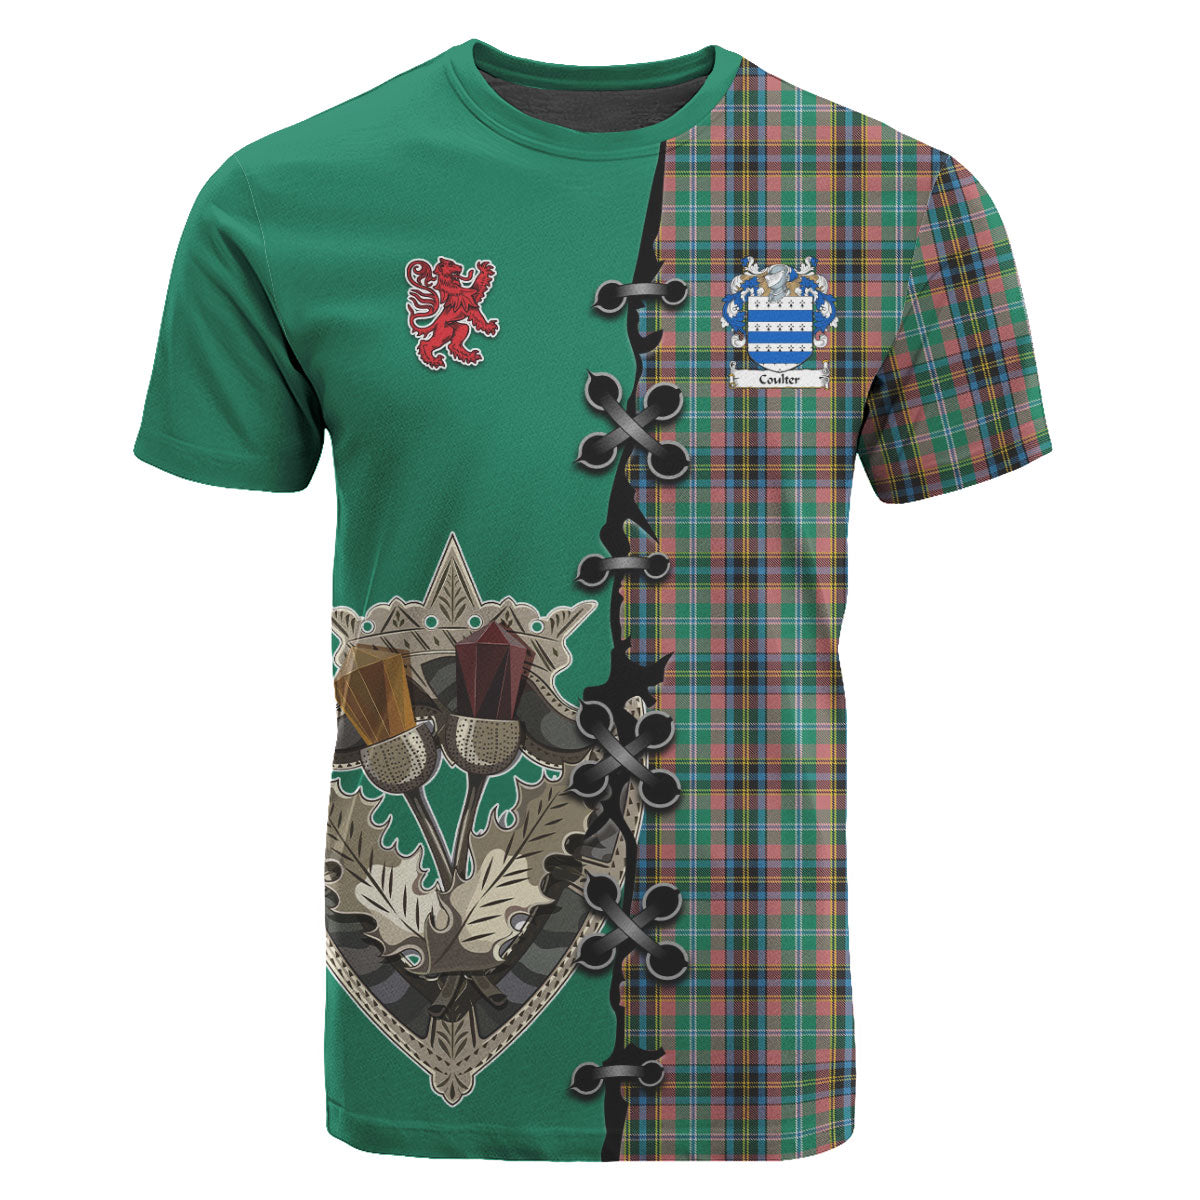 Coulter Tartan T-shirt - Lion Rampant And Celtic Thistle Style